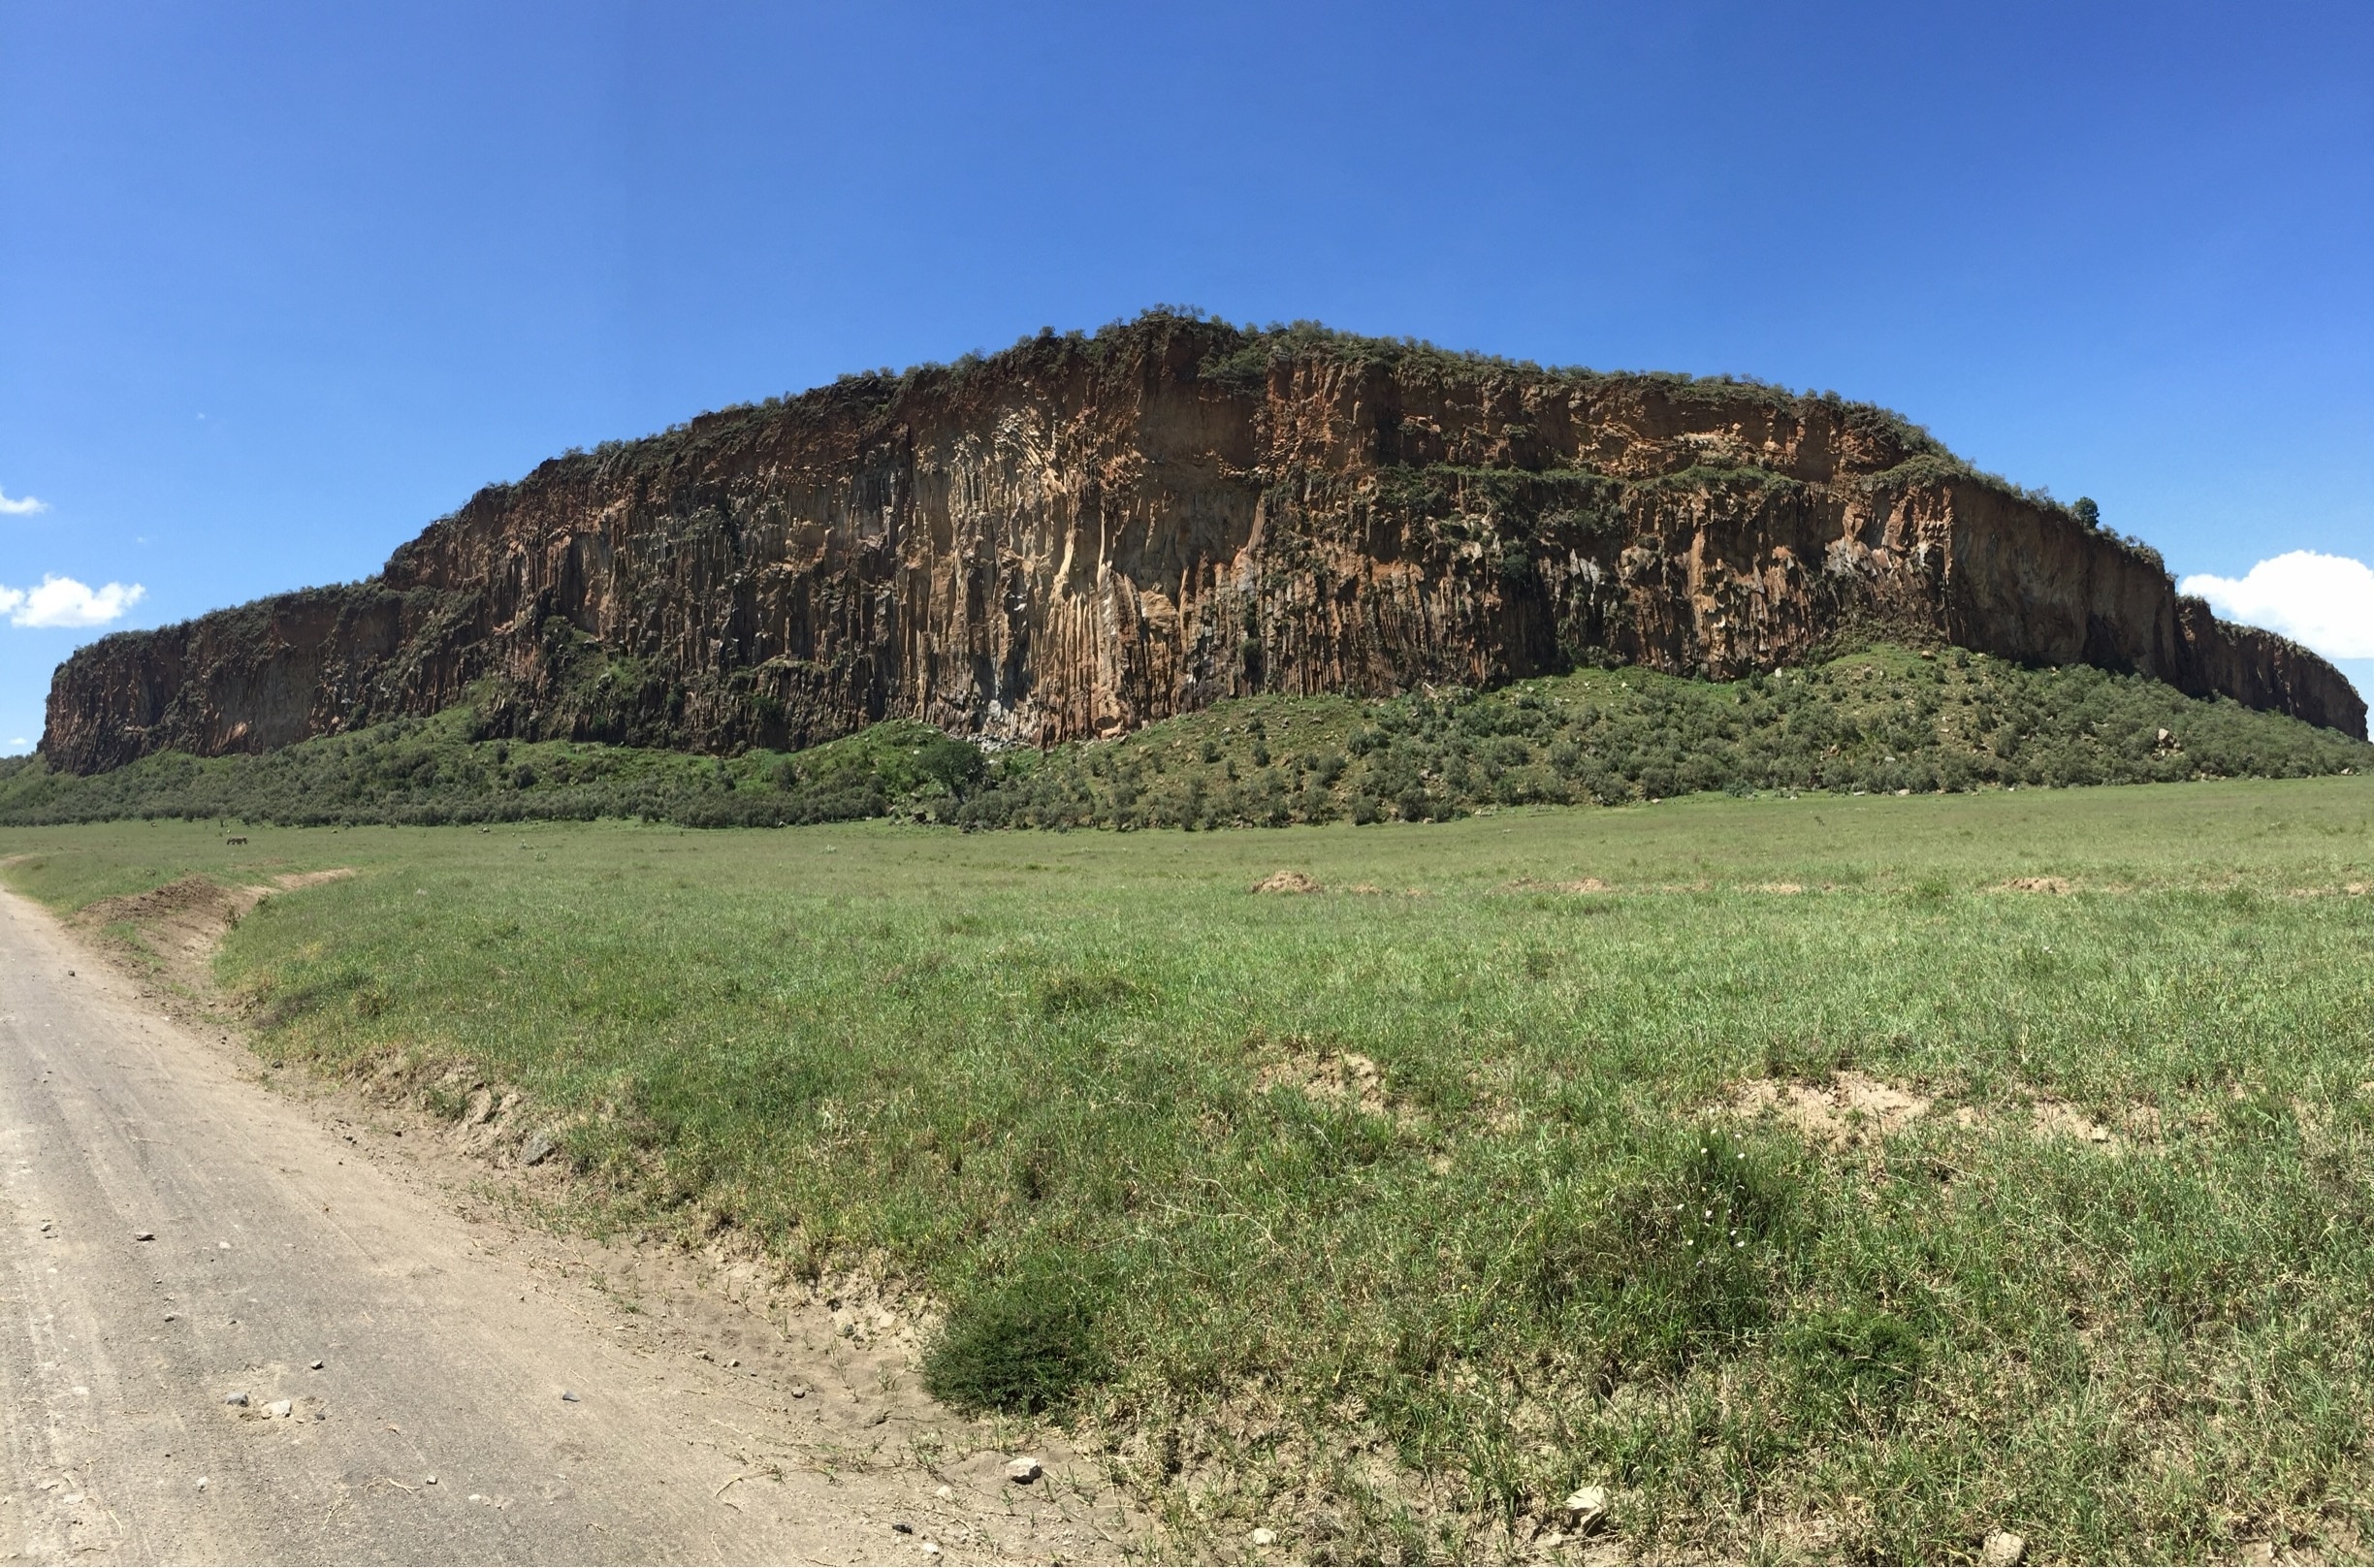 Panoramic shot of the amazing rock formations 